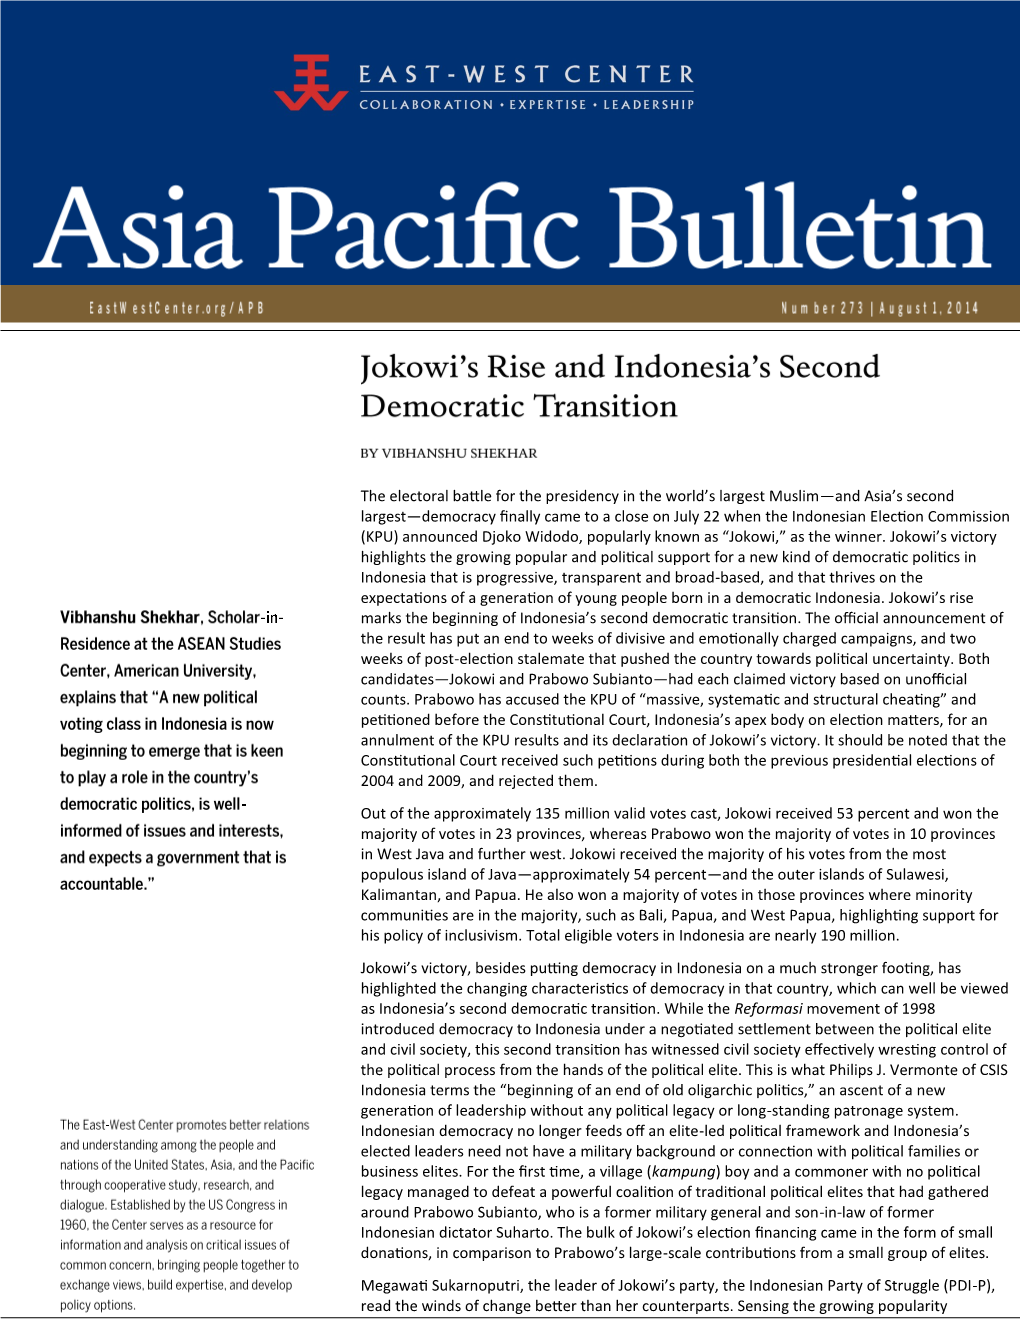 Jokowi's Rise and Indonesia's Second